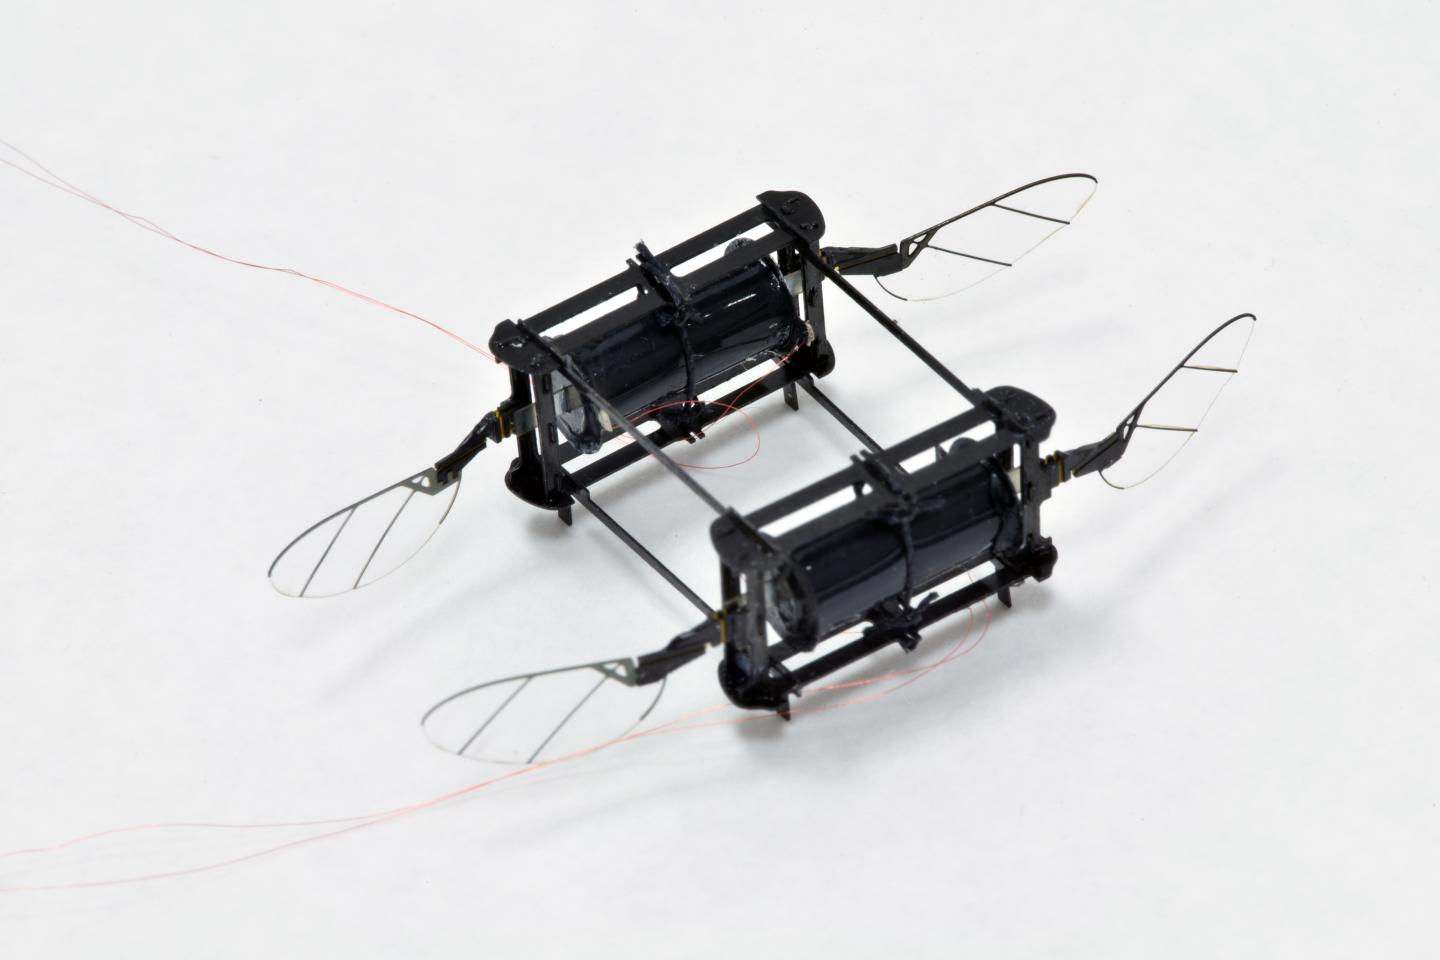 RoboBee Powered by Soft Muscles